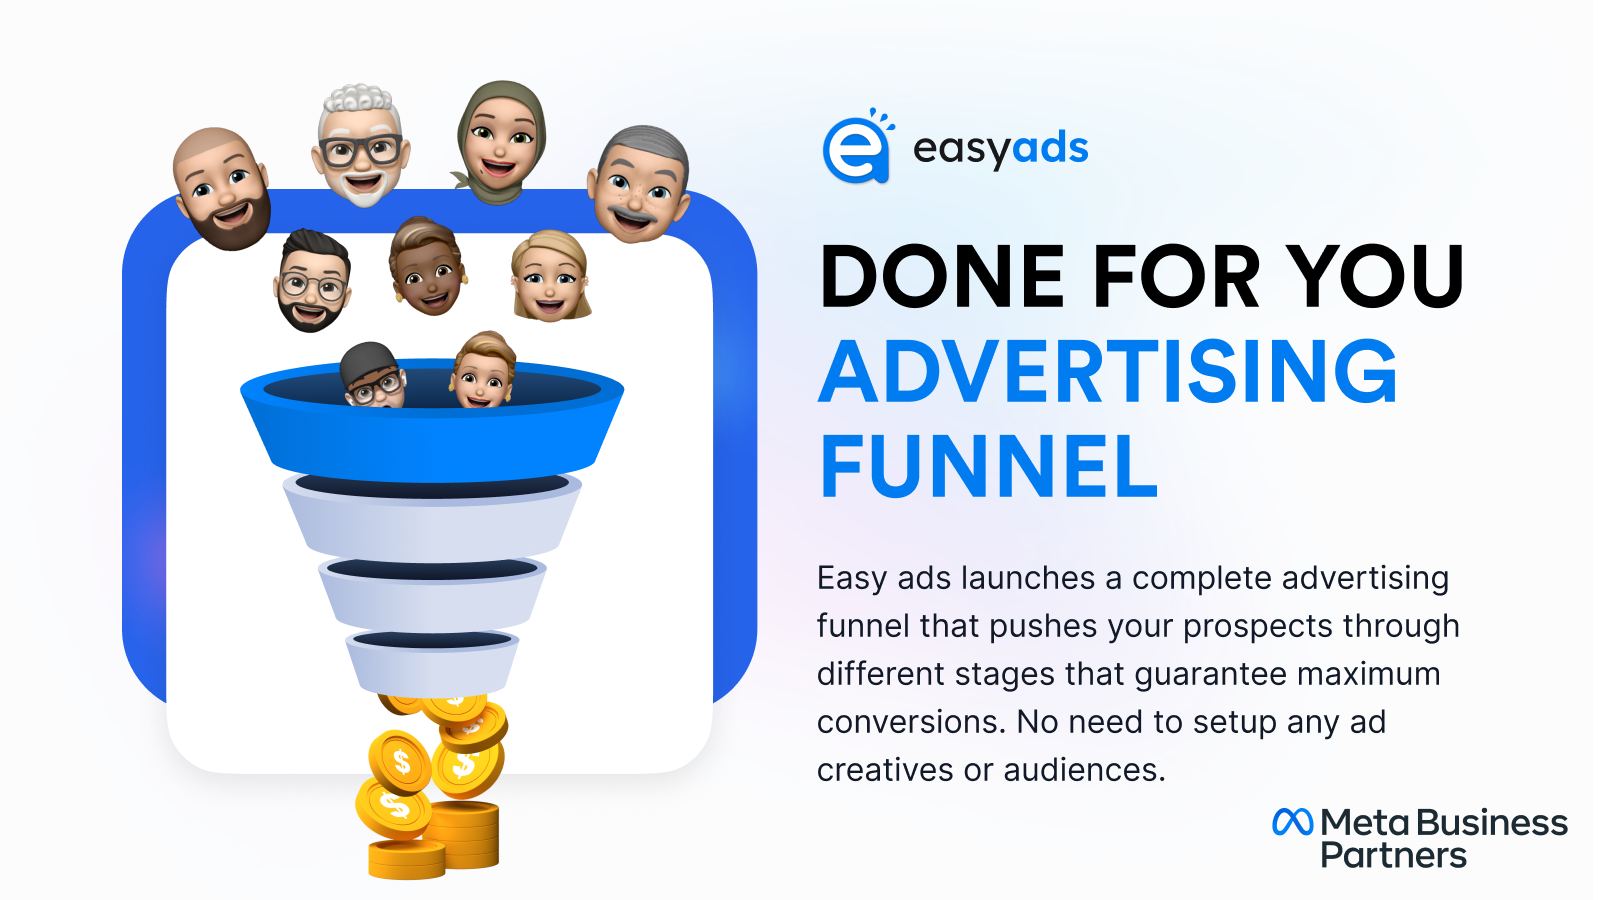 Easily create a robust advertising funnel in a few simple steps